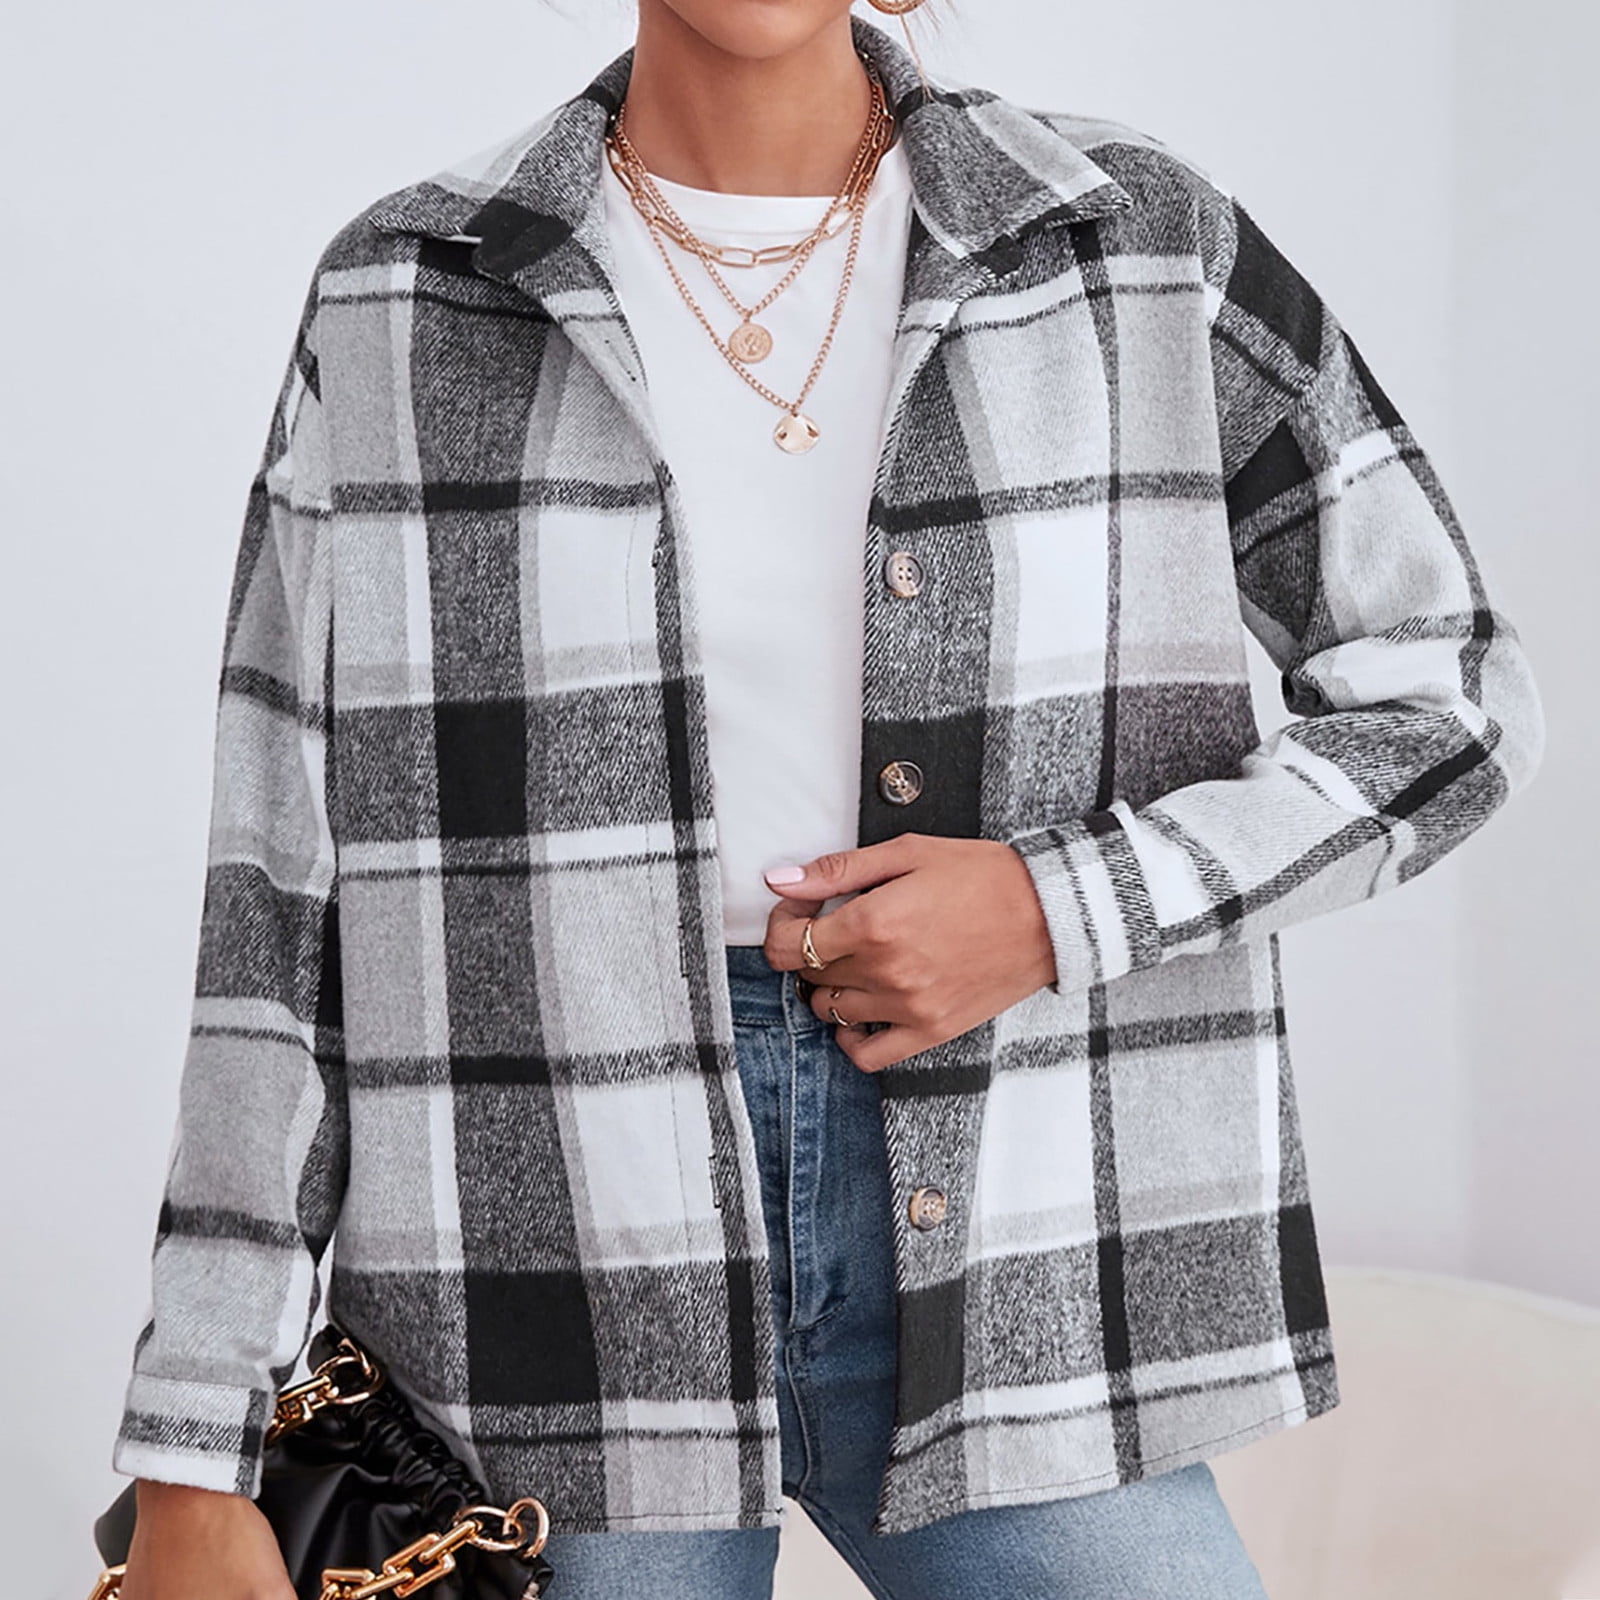 plaid flannel shirts for women Flannels for Women 2023 Fall Cropped Shacket  Jacket Fashion Plaid Button Down Shirt 2023 Oversized Coat Tops oversized  flannel shacket 